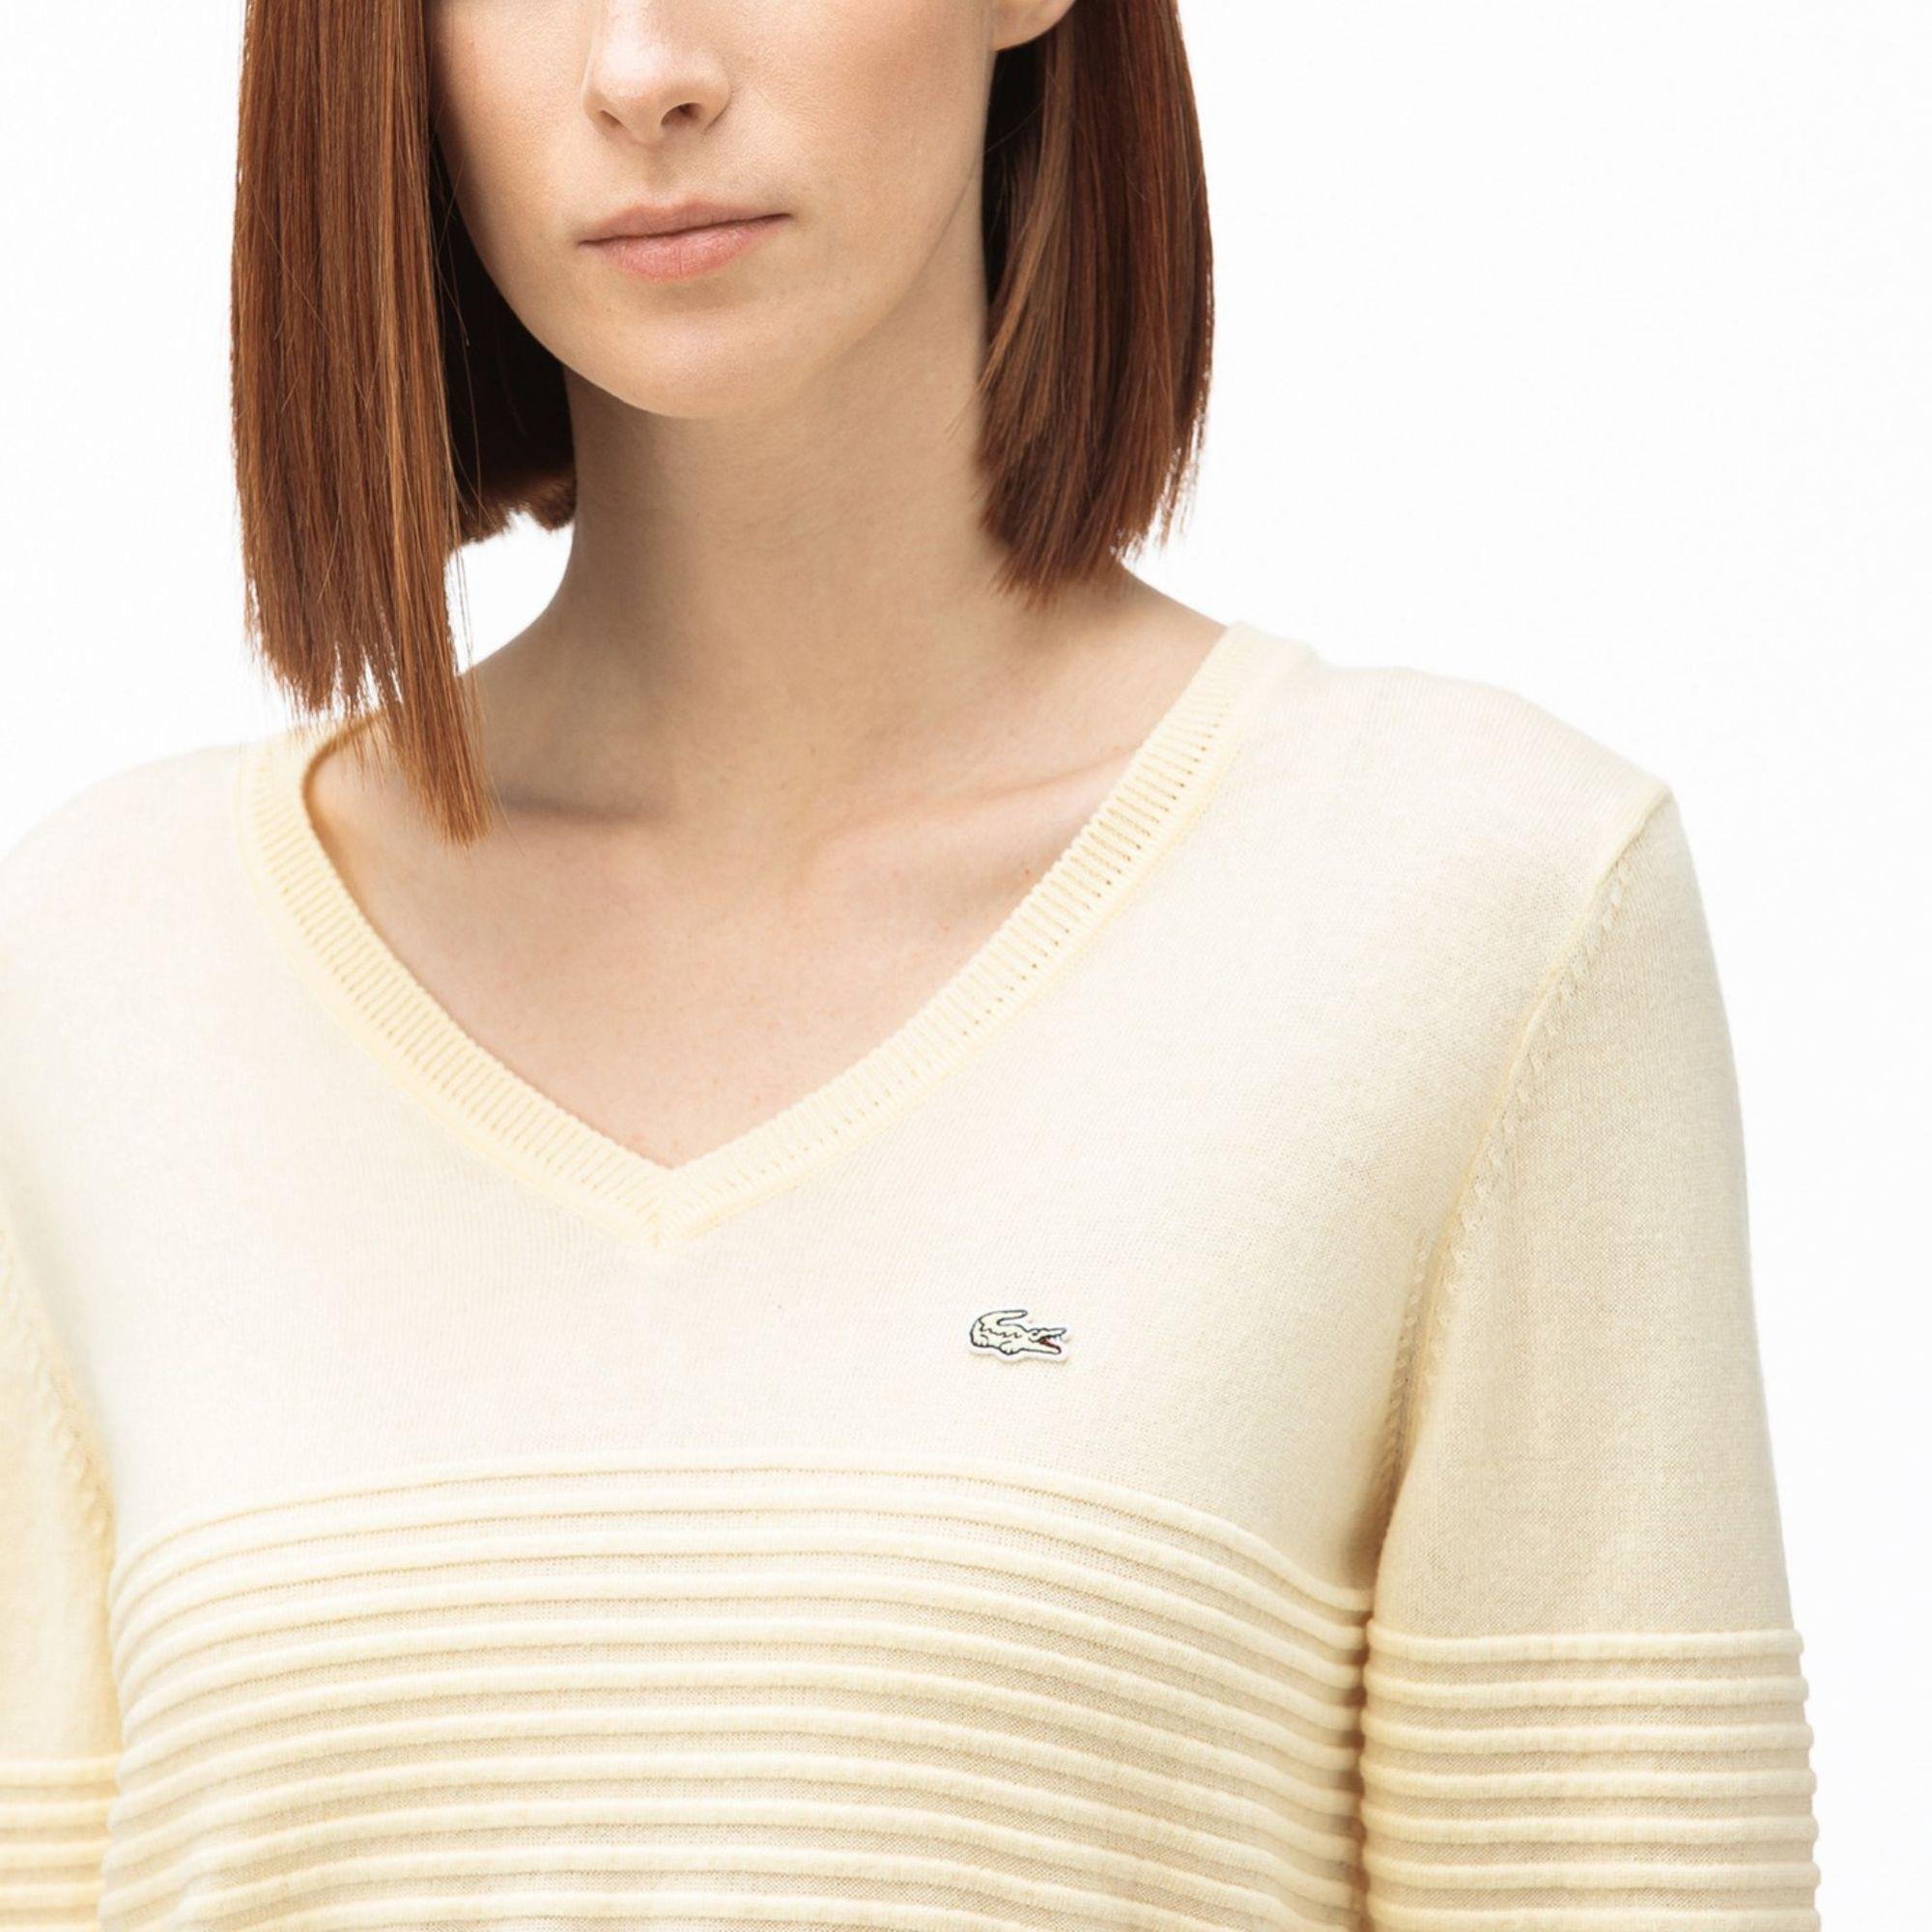 Lacoste Women's V-Neck Patterned Tricot Sweater